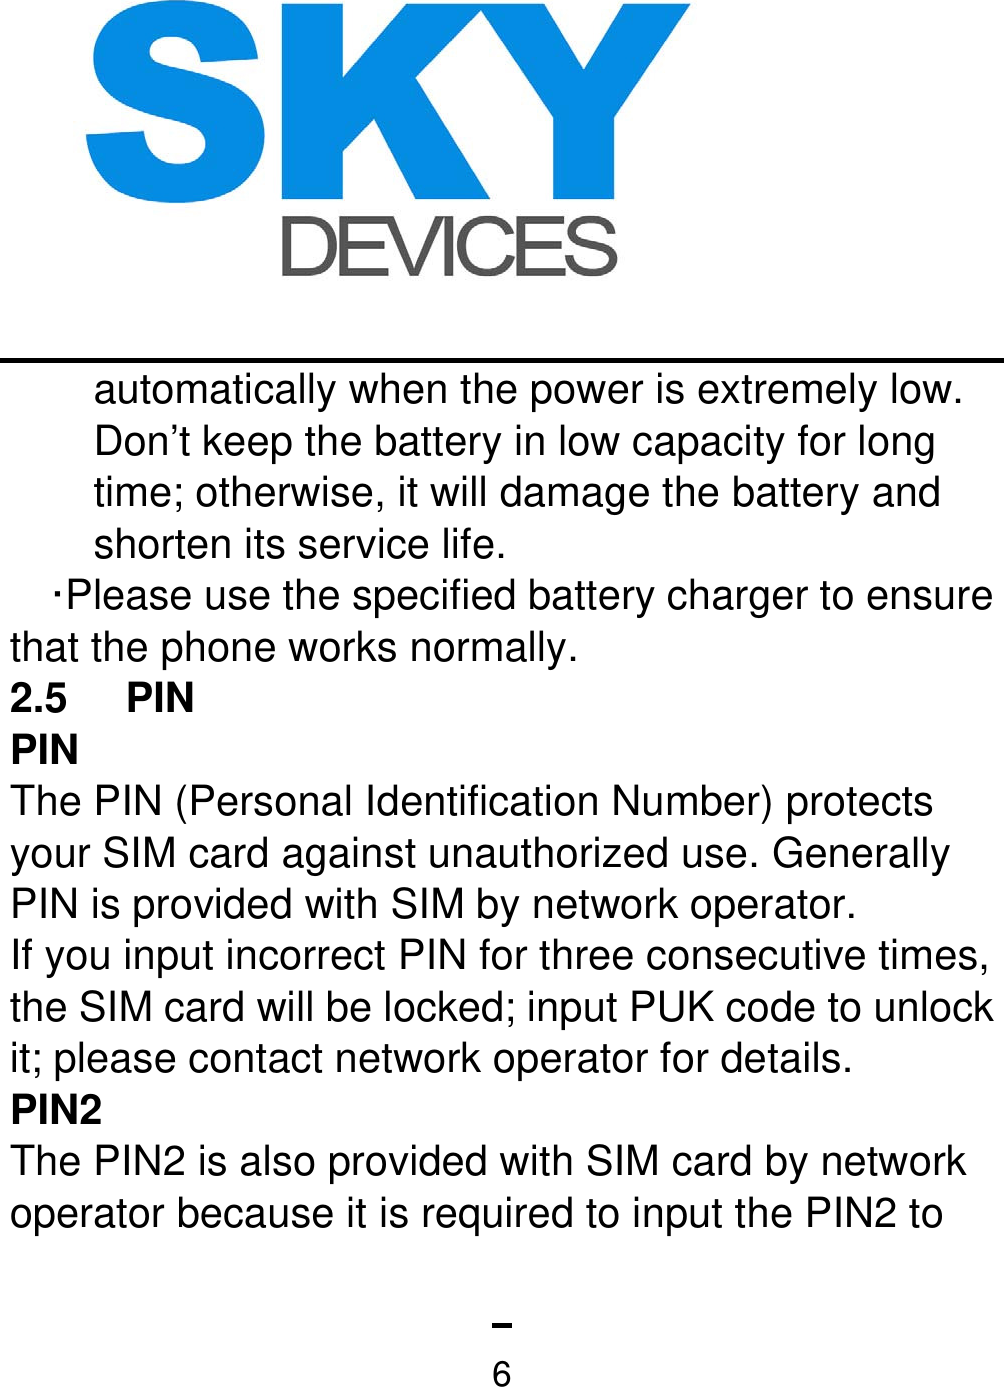   6automatically when the power is extremely low. Don’t keep the battery in low capacity for long time; otherwise, it will damage the battery and shorten its service life.   ·Please use the specified battery charger to ensure that the phone works normally. 2.5 PIN PIN The PIN (Personal Identification Number) protects your SIM card against unauthorized use. Generally PIN is provided with SIM by network operator.   If you input incorrect PIN for three consecutive times, the SIM card will be locked; input PUK code to unlock it; please contact network operator for details. PIN2 The PIN2 is also provided with SIM card by network operator because it is required to input the PIN2 to 